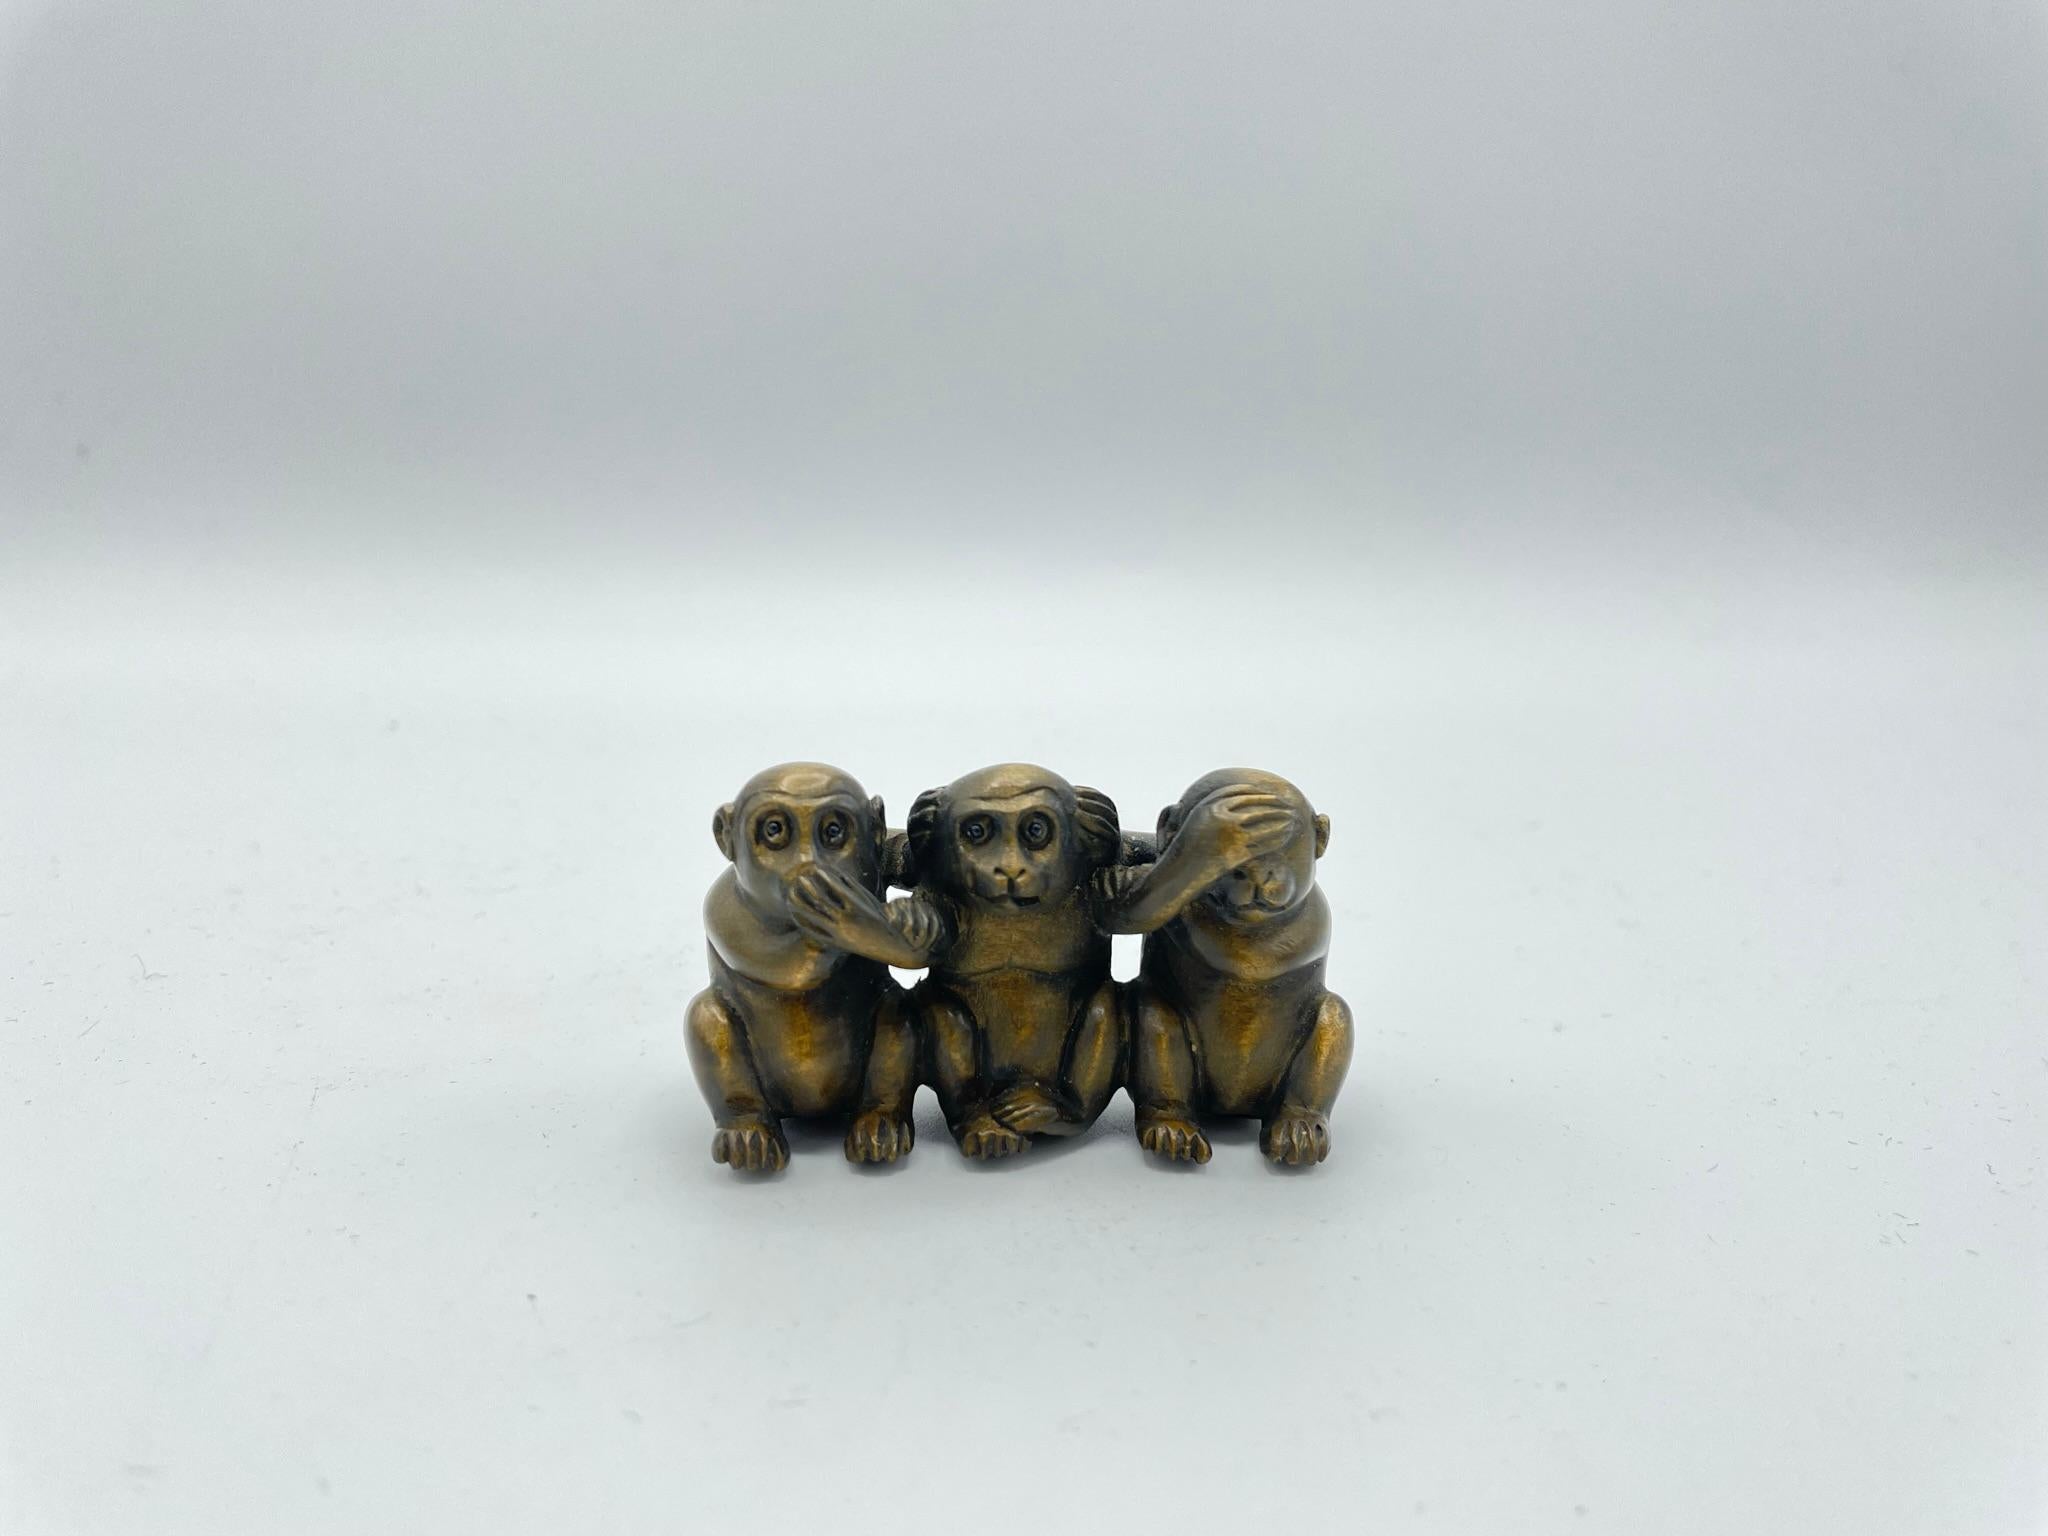 This is an antique netsuke made in Japan around Edo period 1800s.
Netsuke is a miniature sculpture, originating in 17th century Japan.
Initially a simply-carved button fastener on the cords of an inro box, netsuke later developed into ornately